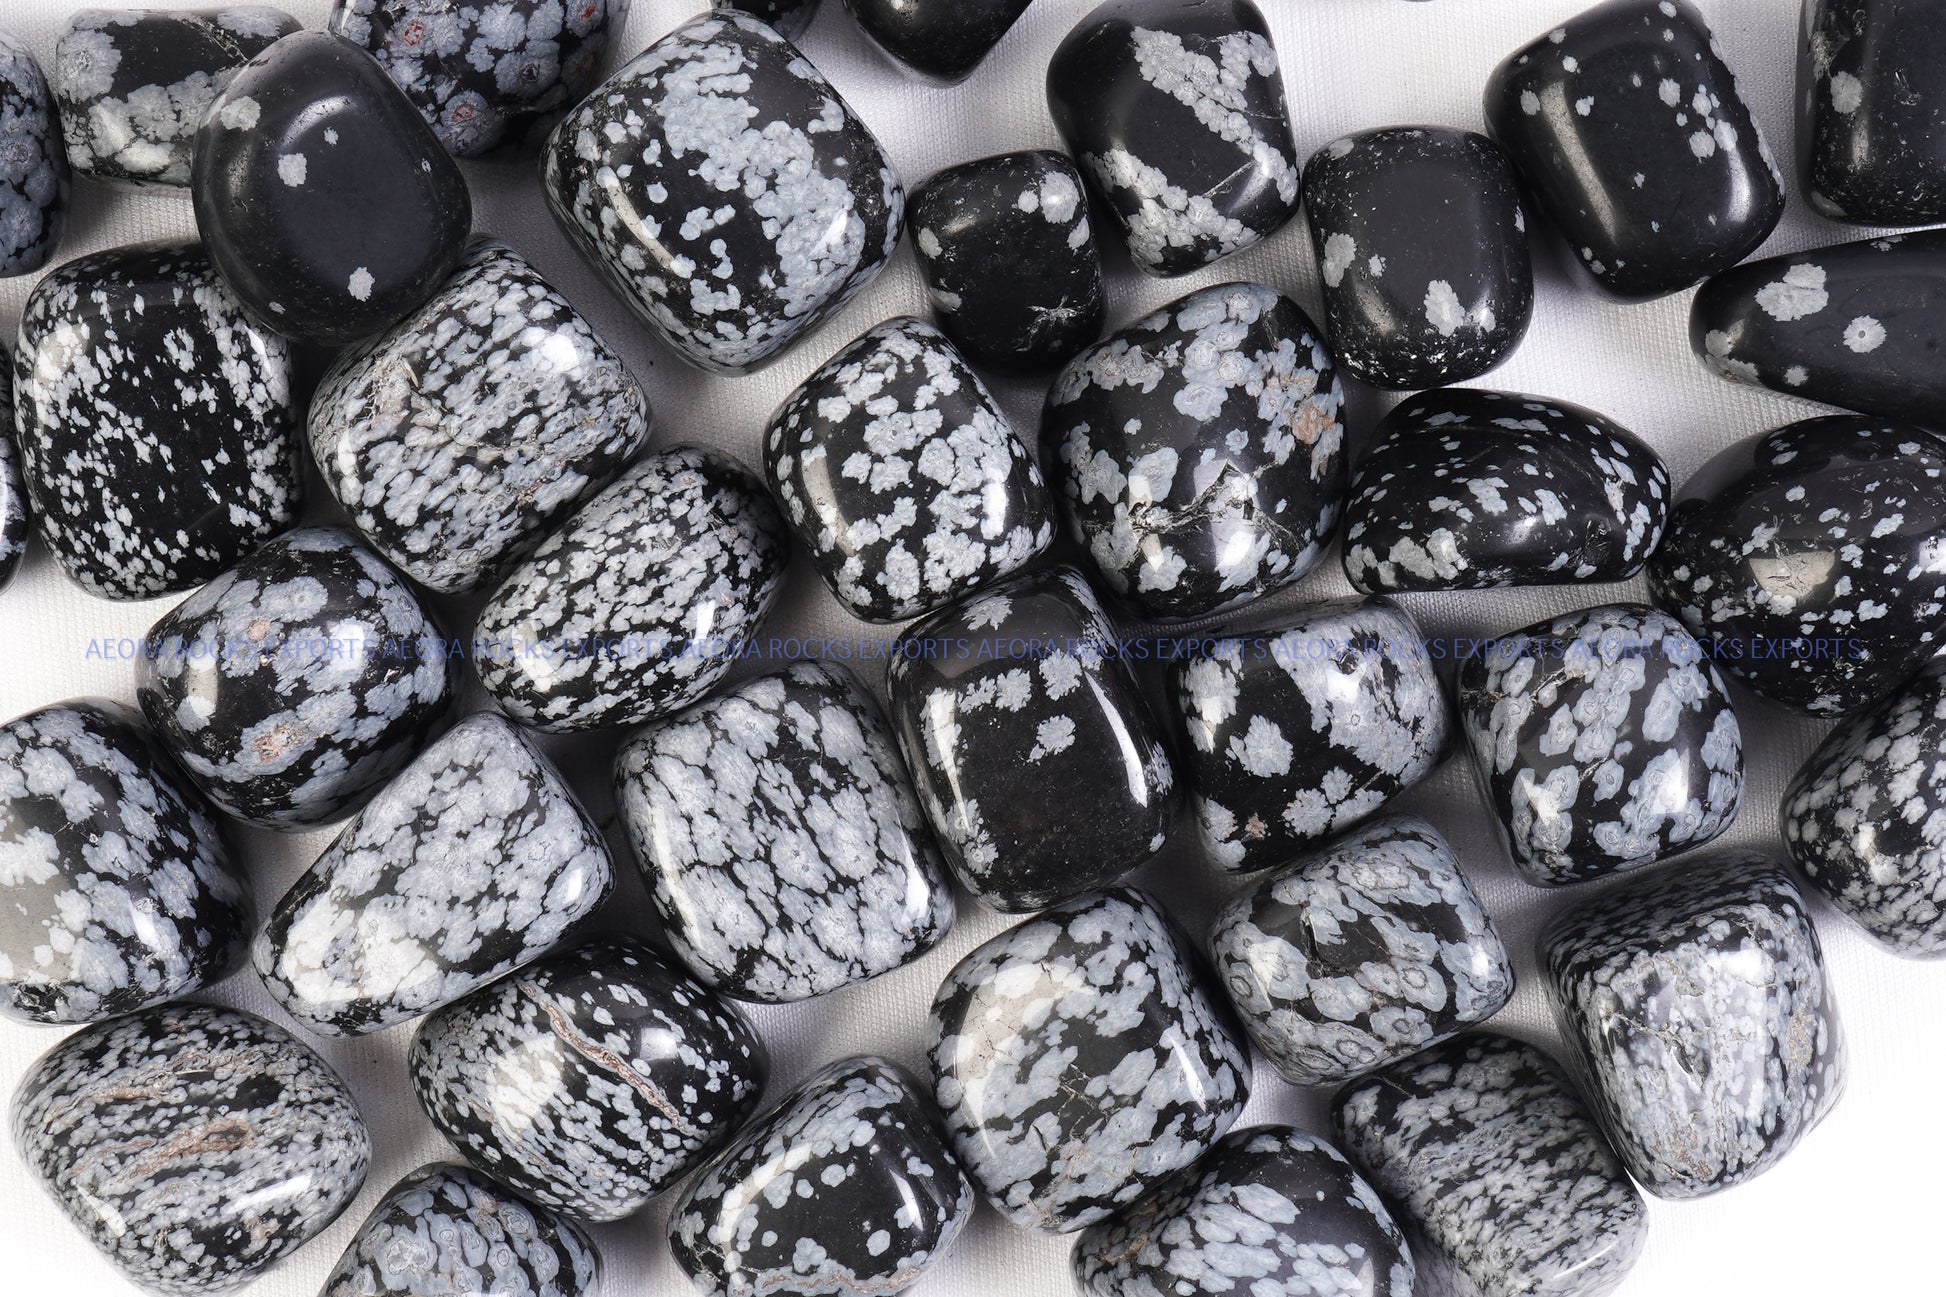 Tumble Stone Snowflake Obsidian | Buy Online Snowflake Obsidian Tumbled Stone – AEORA ROCKS INDIA -Healing Crystals superstore